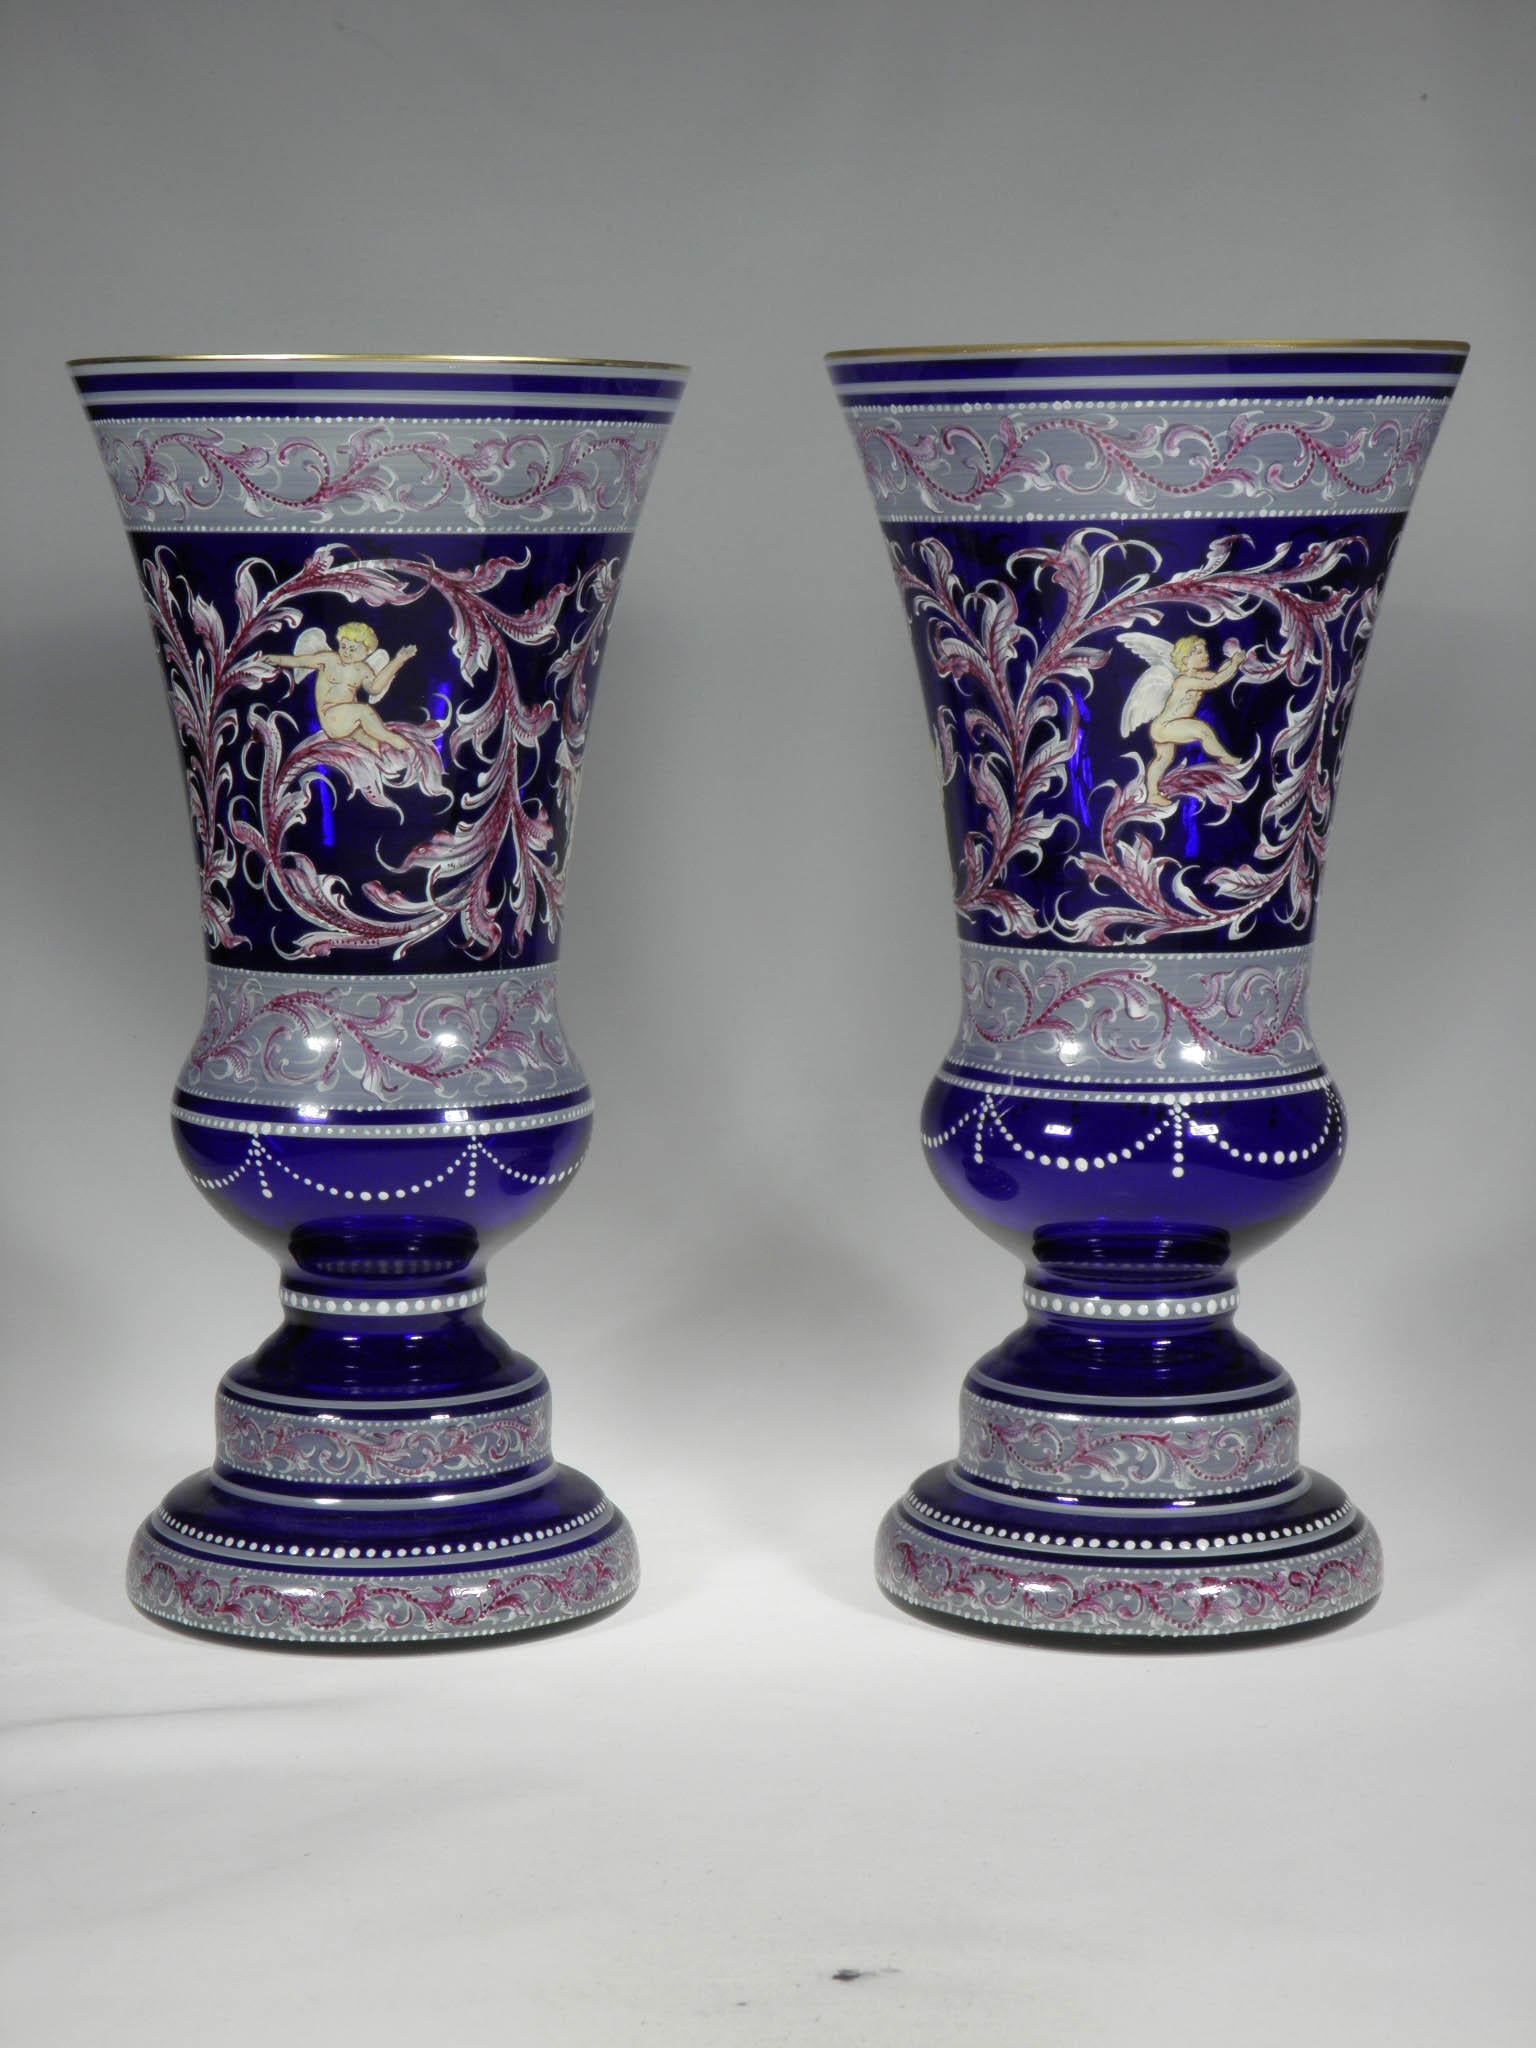 Bohemian cobalt set of vases from 20th-21st century with Amor motive.
Hand painted.